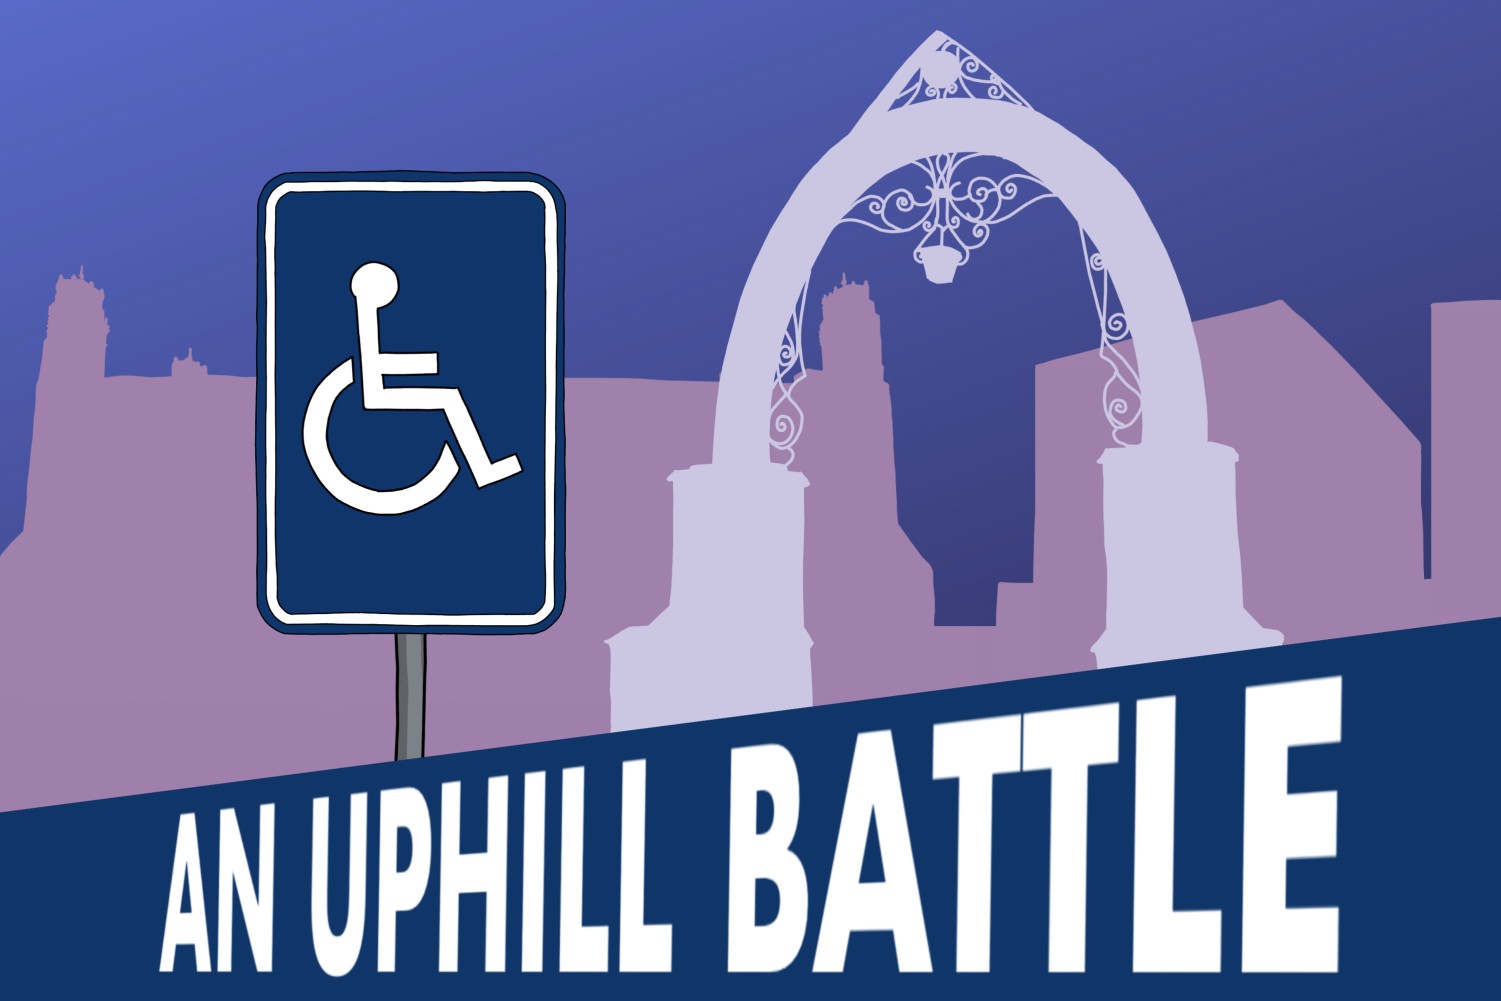 An+illustration+of+a+dark+blue+ramp+with+the+phrase+An+Uphill+Battle+written+across+it.+In+the+background%2C+there+is+a+wheelchair+sign+next+to+a+light+purple+silhouette+of+Weber+Arch+and+darker+purple+silhouettes+of+Deering+Library+and+Locy+Hall.